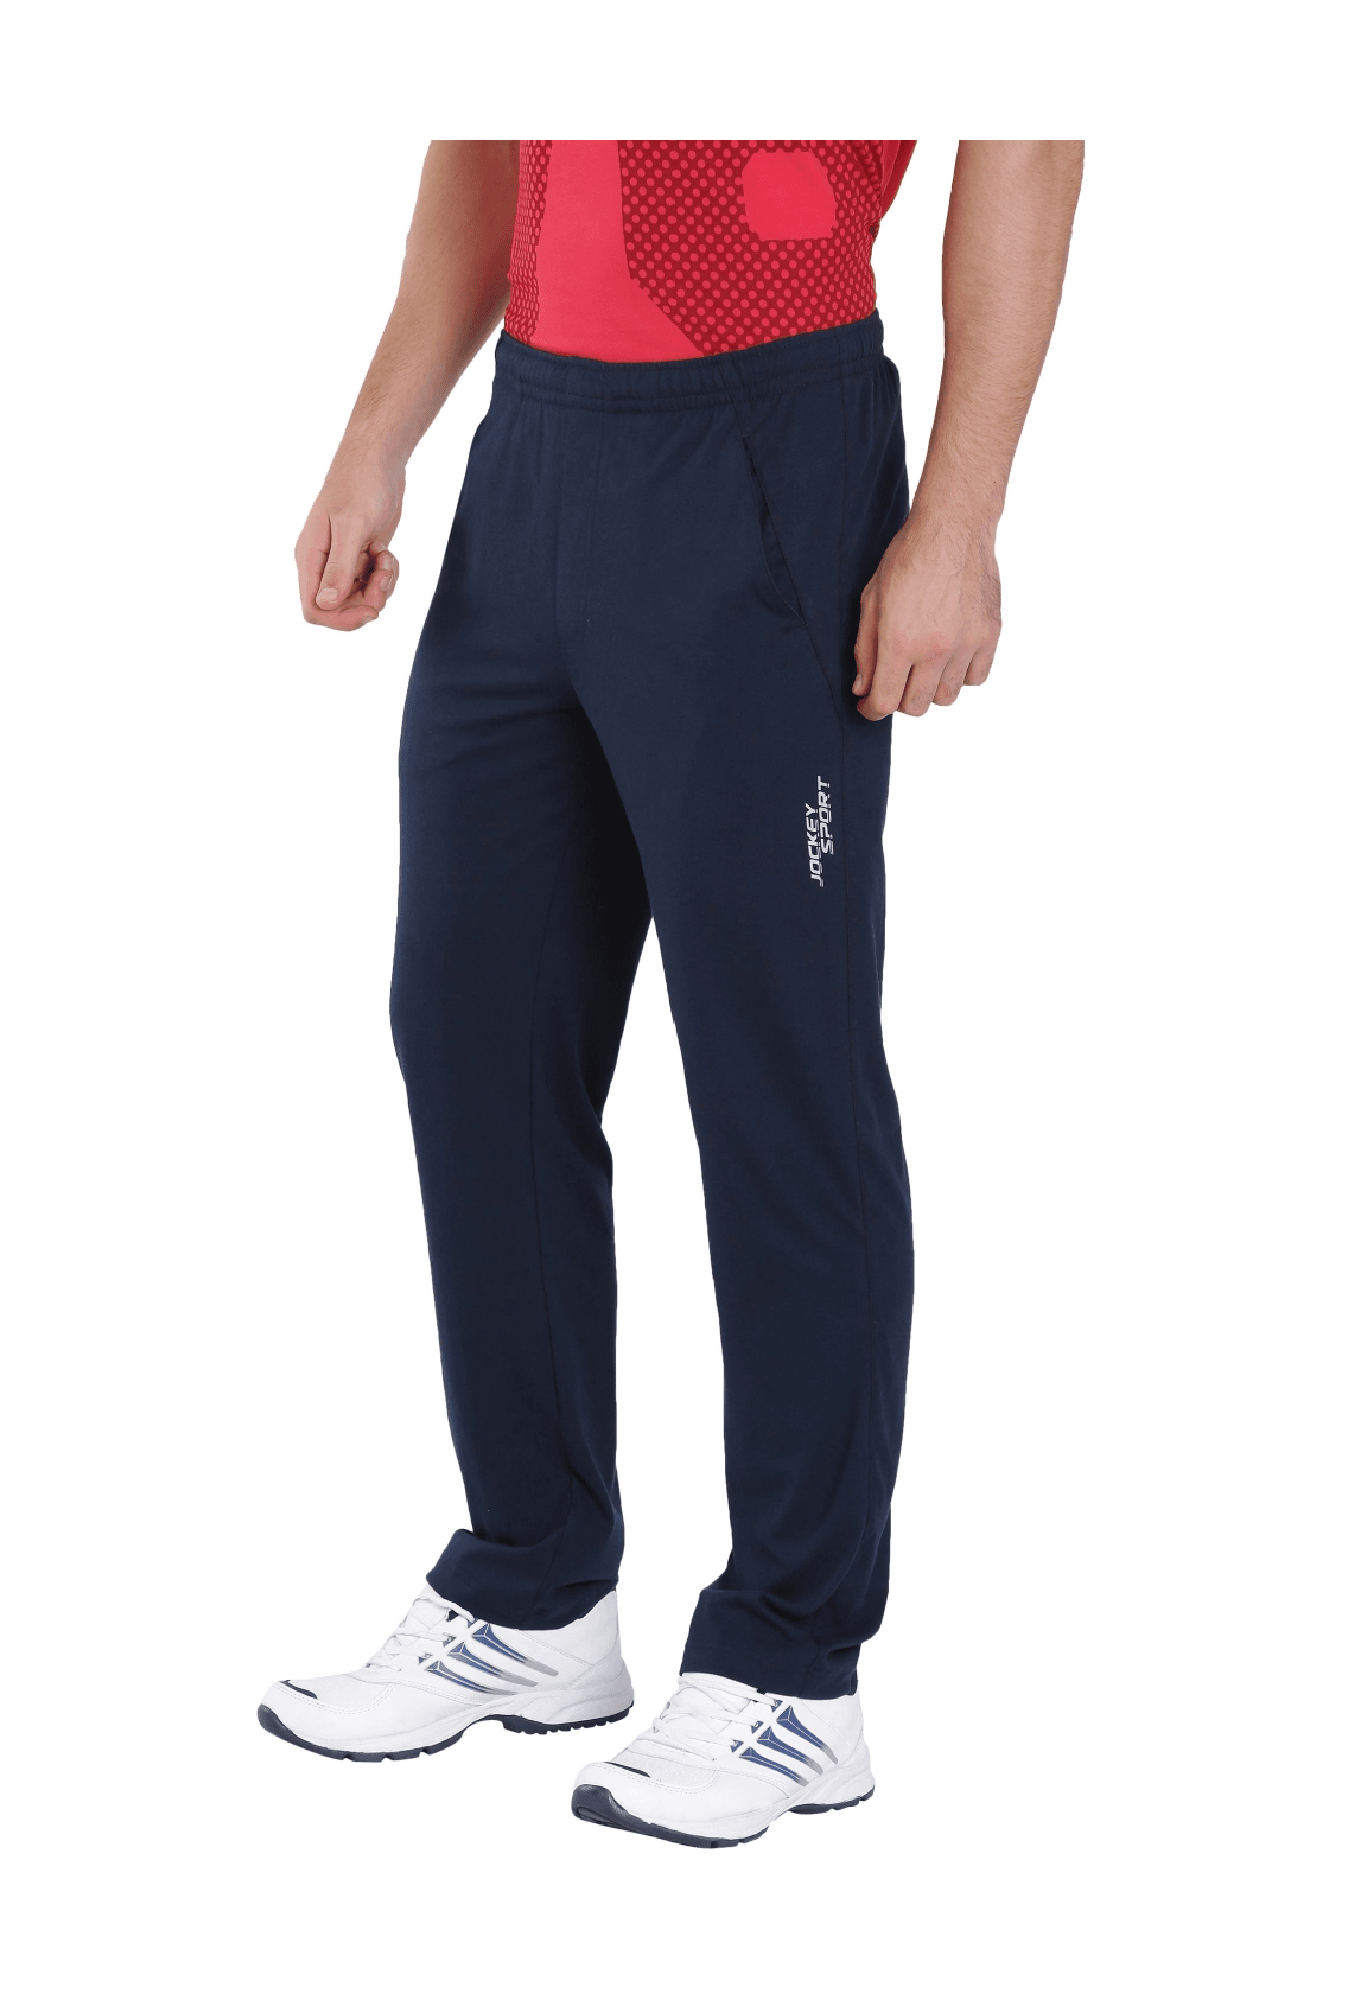 Male Grey And Black Men NS Lycra Track Pant, Brand Logo at Rs 230/piece in  Meerut